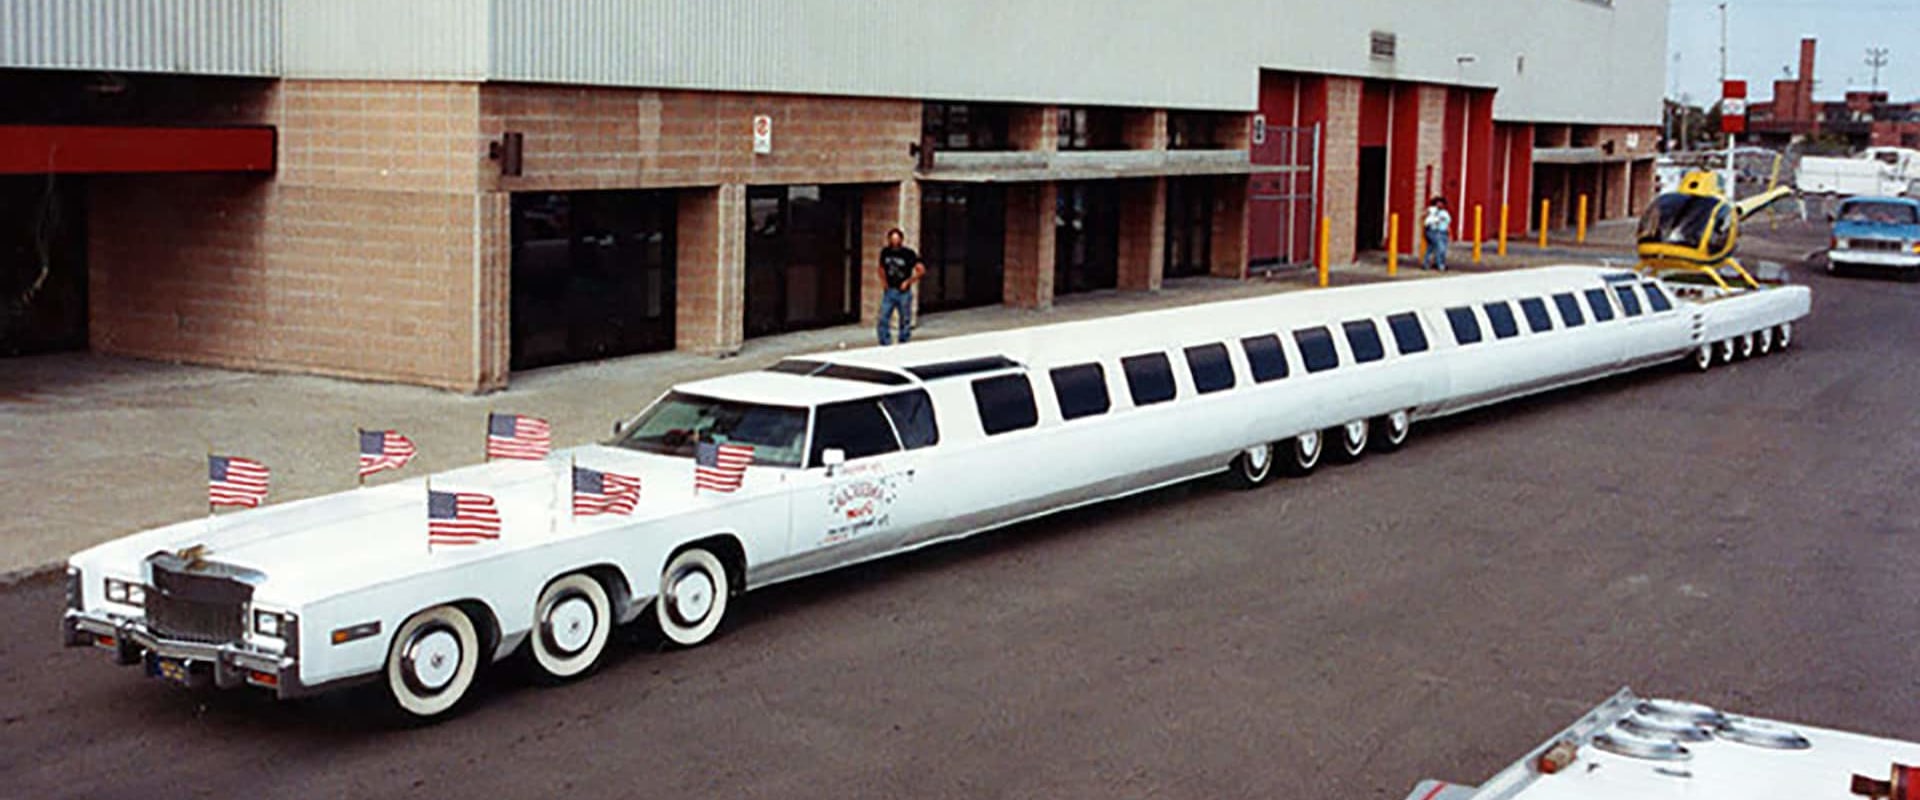 How Long is the American Dream Limousine?